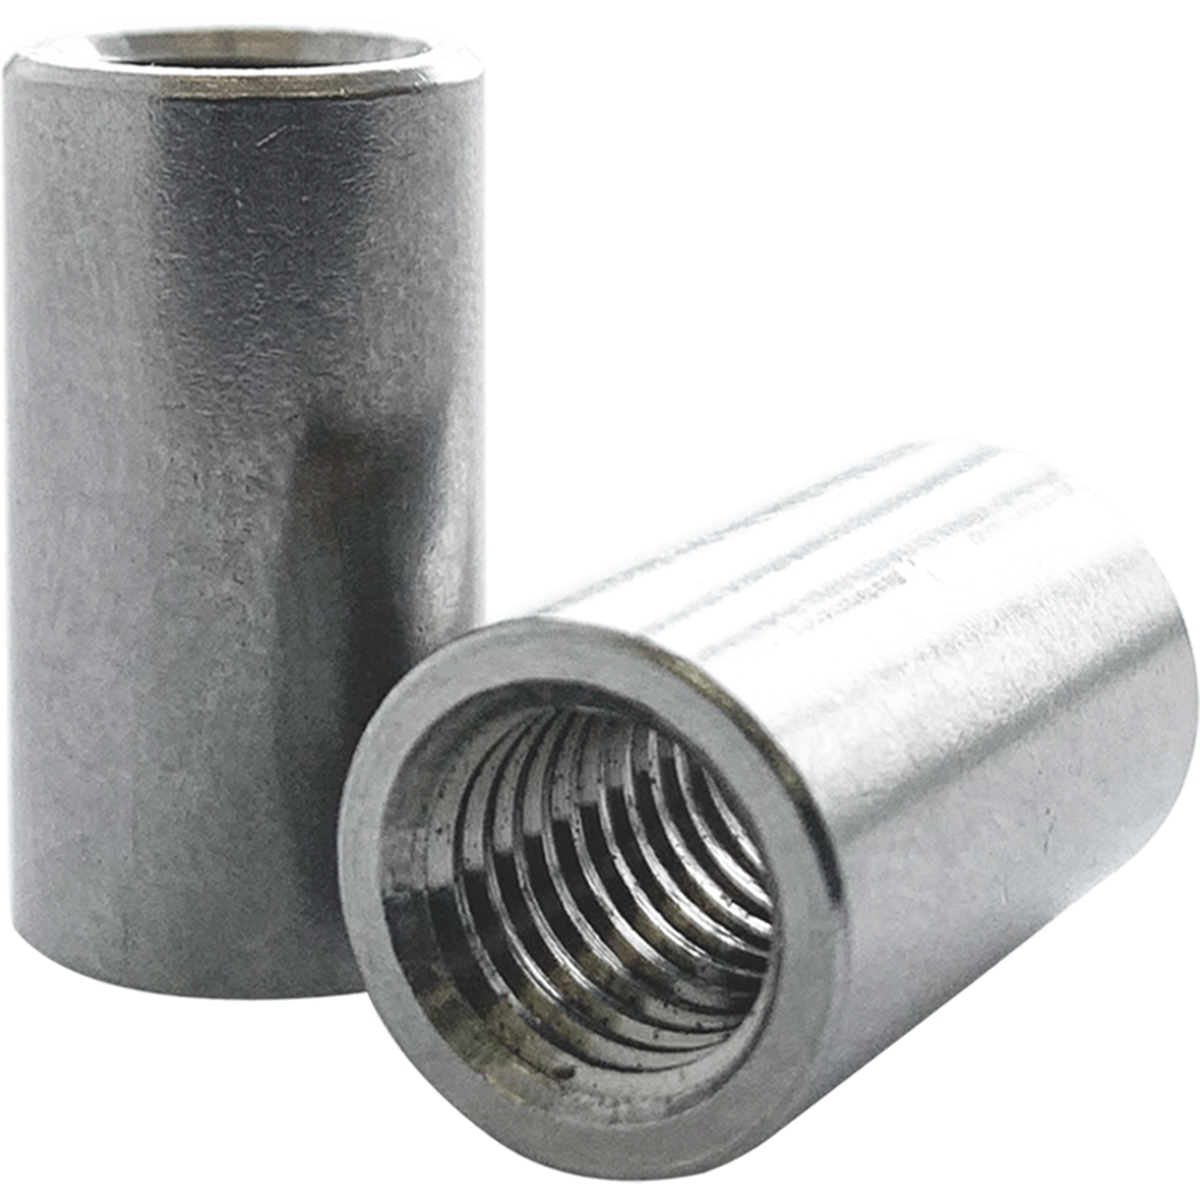 Great prices on connector nuts, used for joining bolts and threaded bar. Also known as coupling nuts or extension nuts.